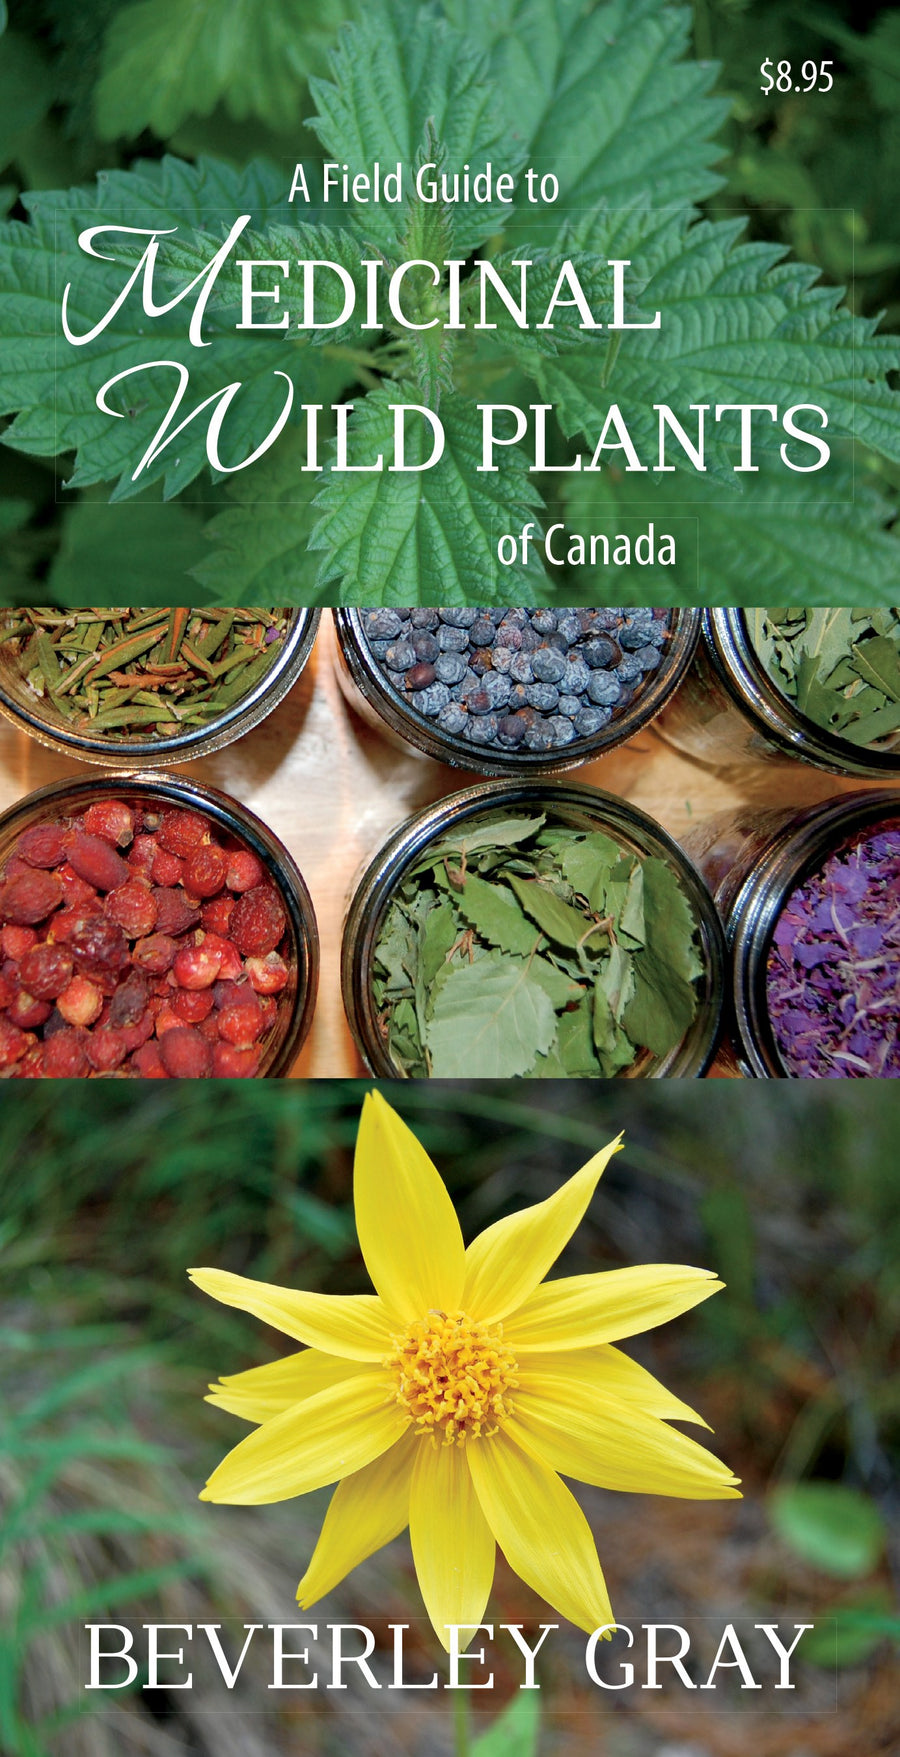 A Field Guide to Medicinal Wild Plants of Canada